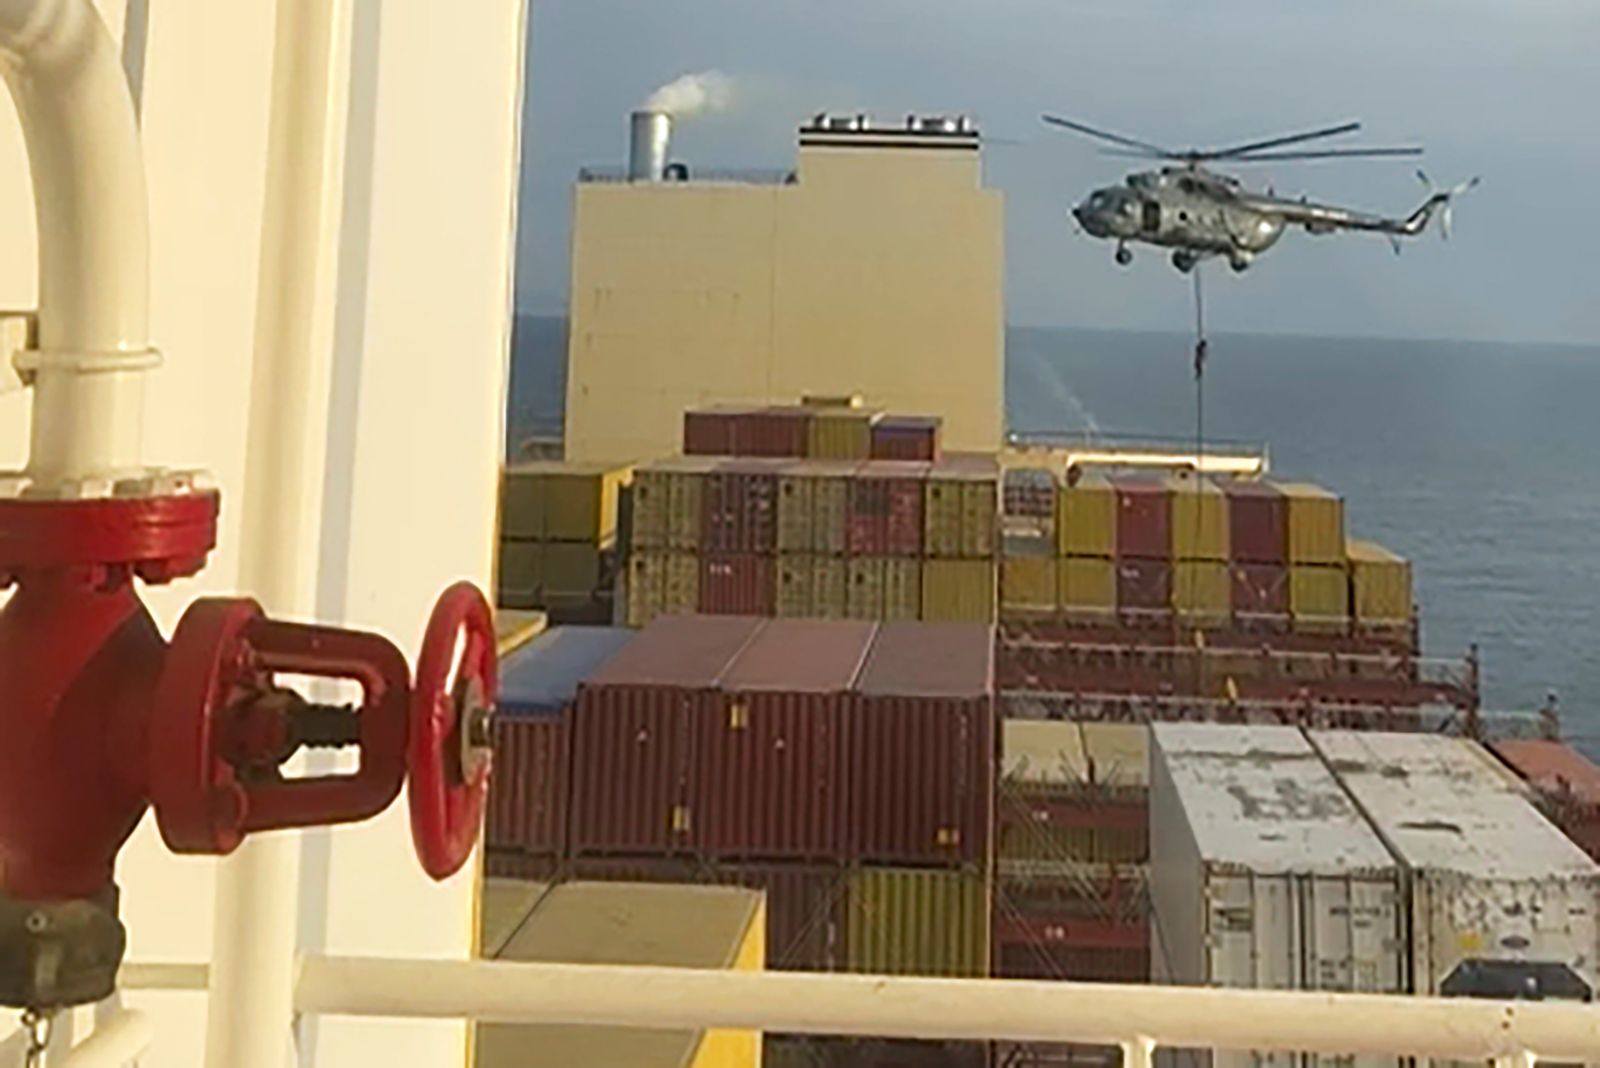 This image made from a video provided to The Associated Press by a Mideast defense official shows a helicopter raid targeting a vessel near the Strait of Hormuz on Saturday, April 13. 